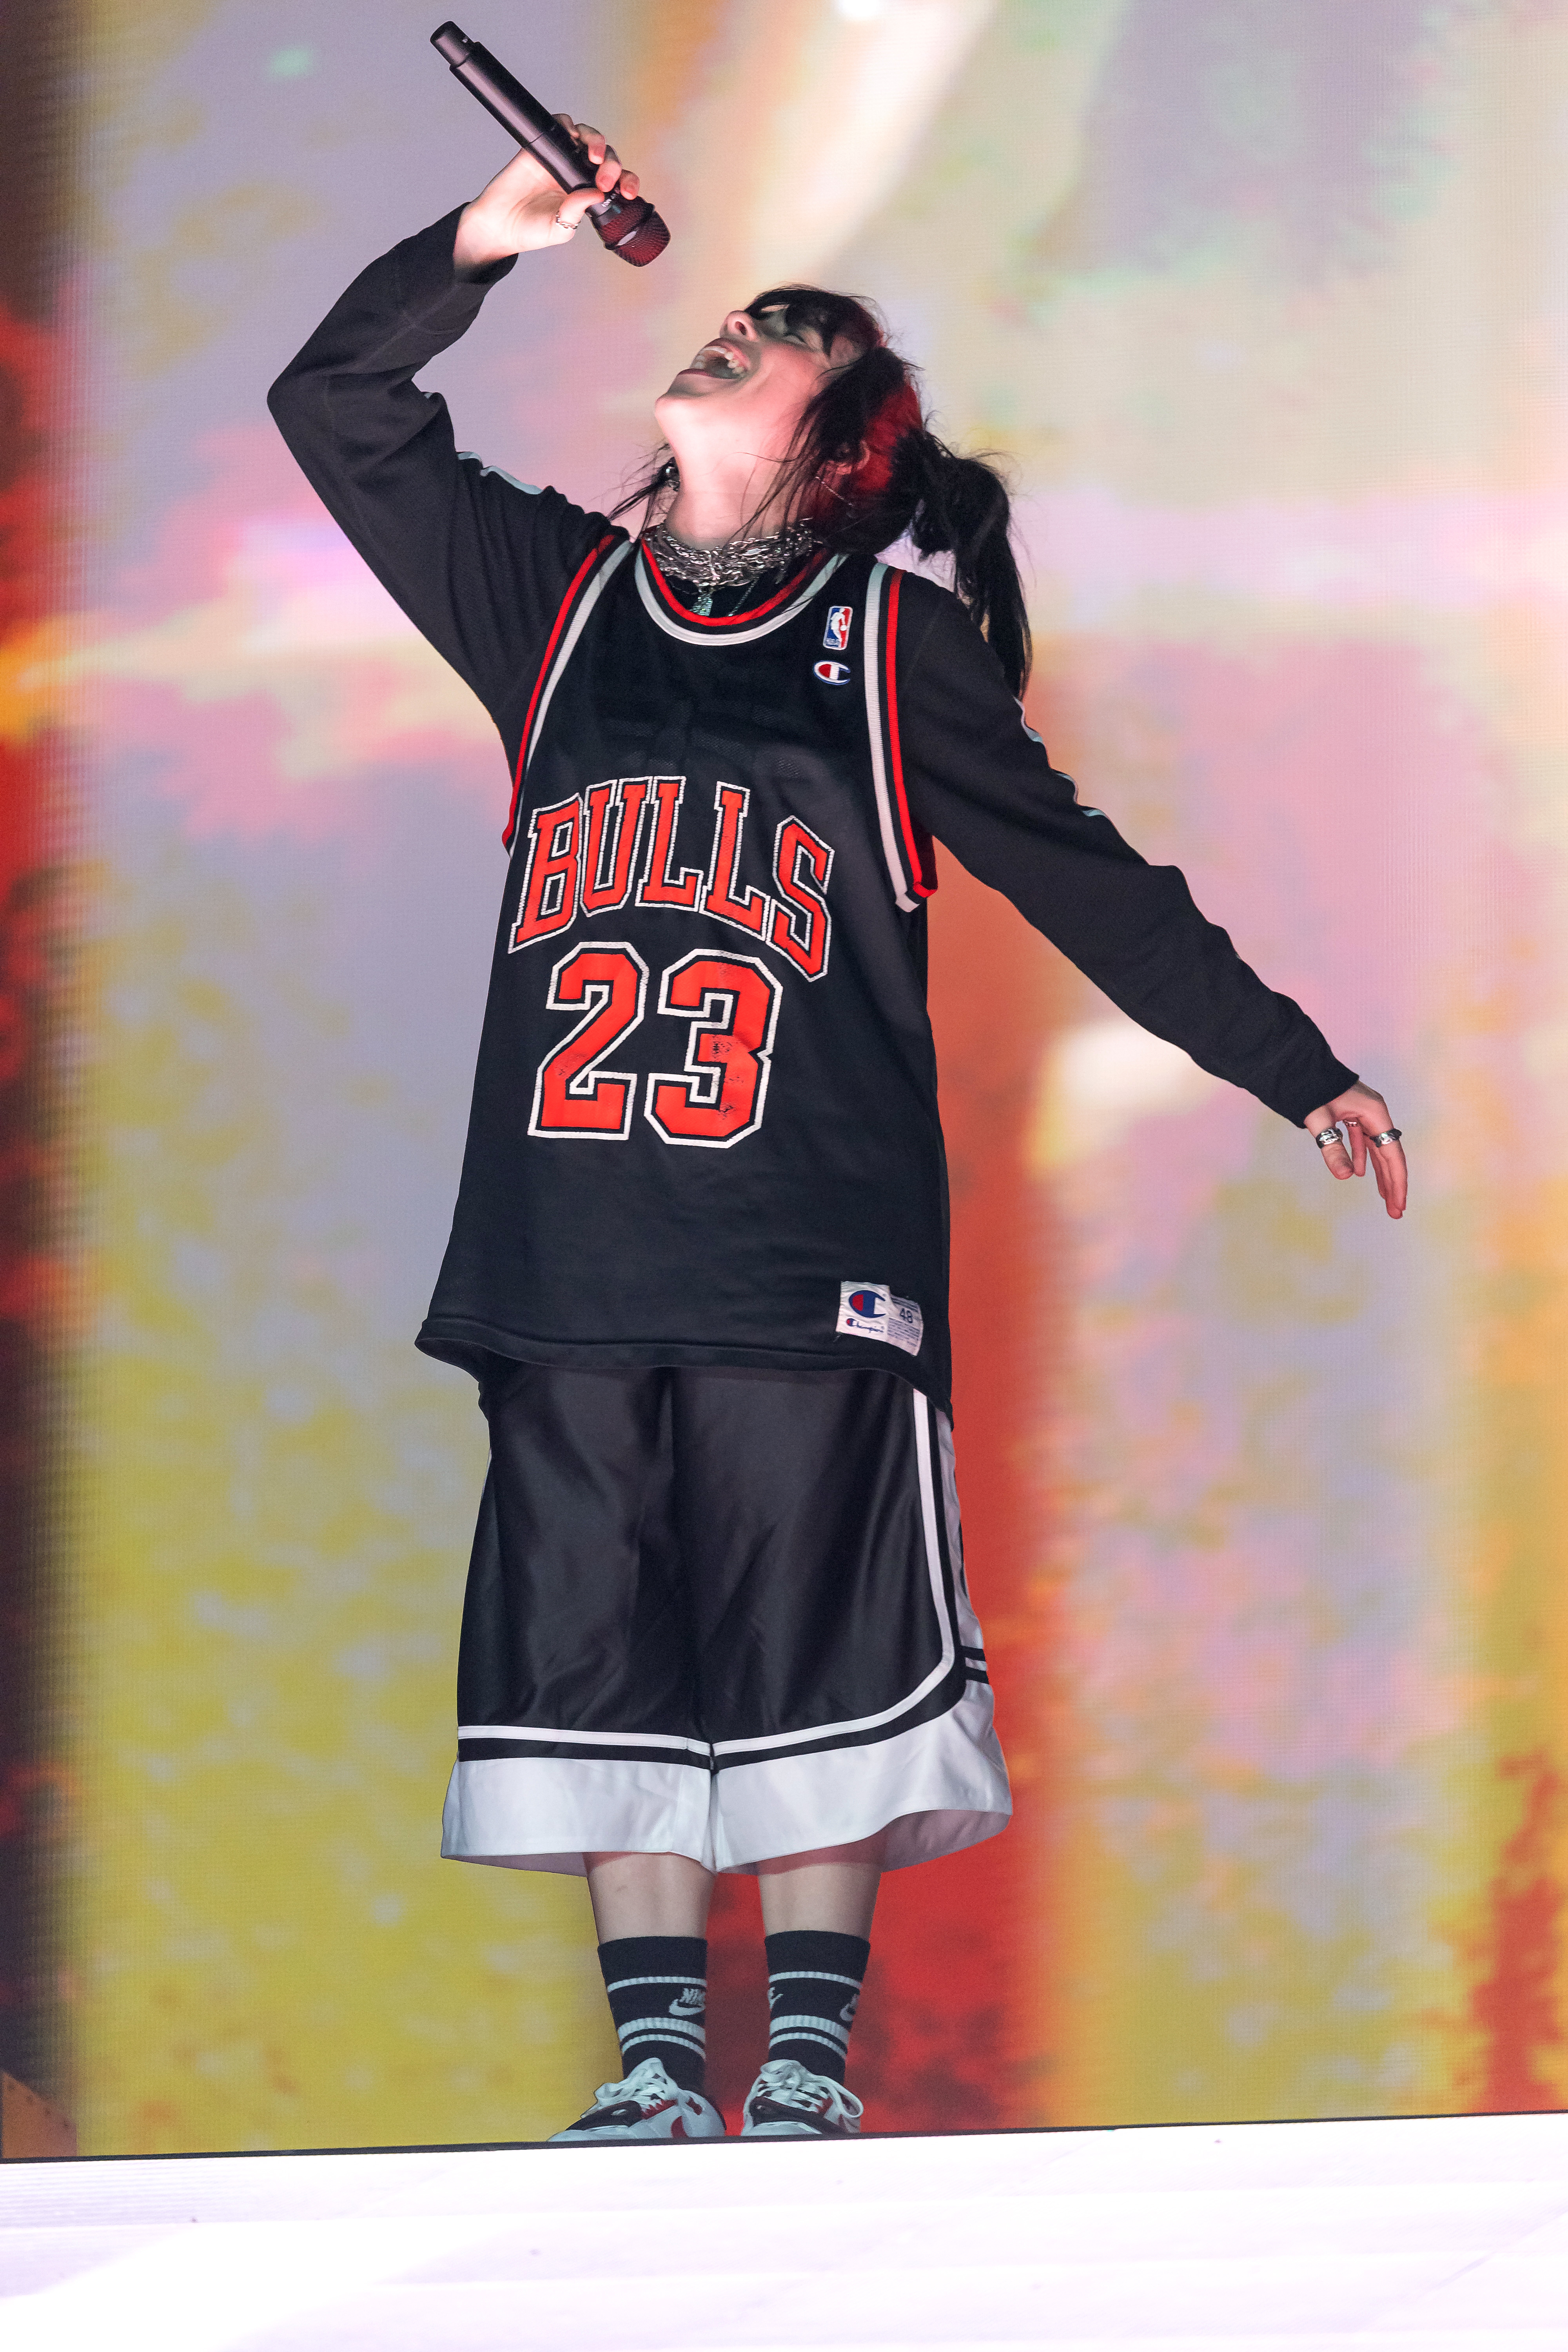 Billie performing onstage wearing a long-sleeved t-shirt, a Chicago Bulls jersey, and long basketball shorts